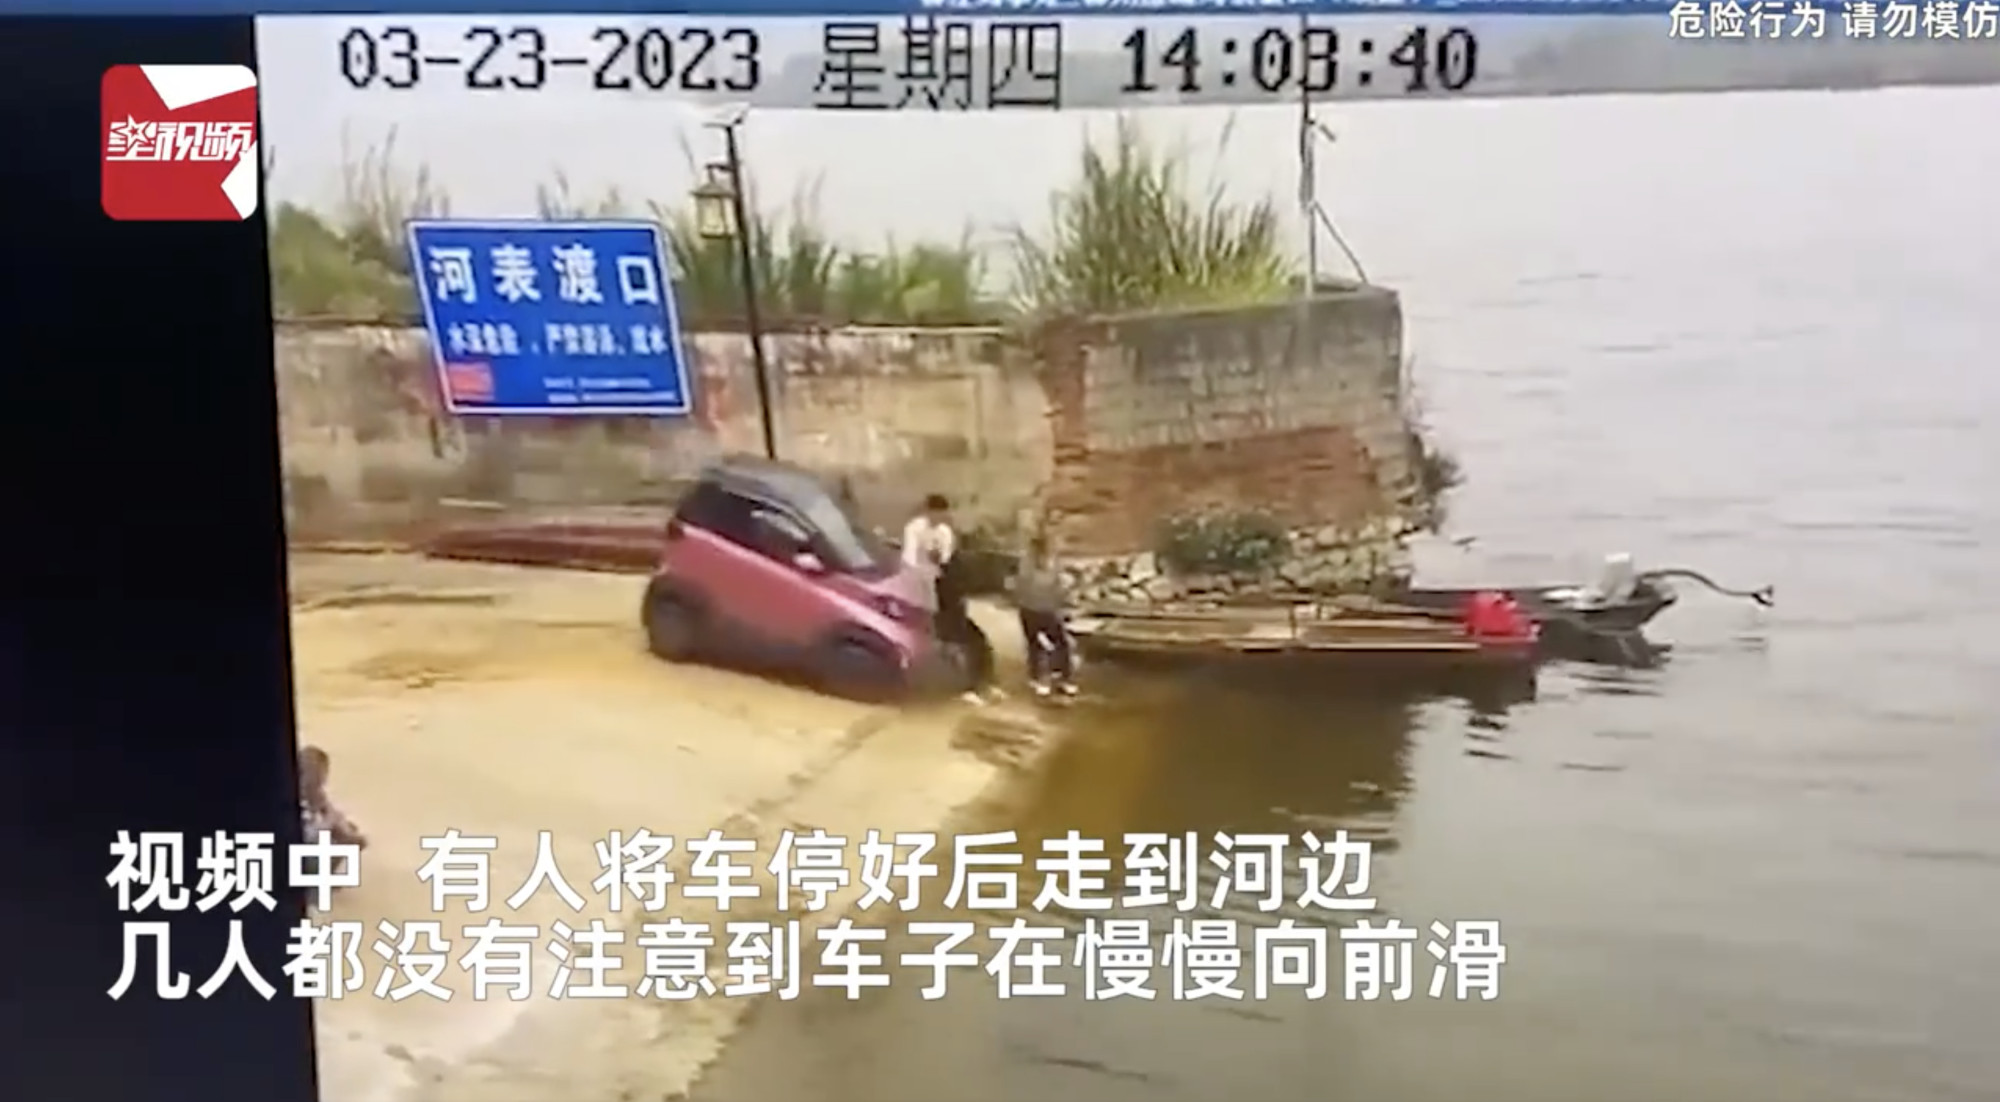 Many who saw the footage online were amazed by the man’s escape without injury after being hit by the car when it rolled down the shore and into the water. Photo: Baidu